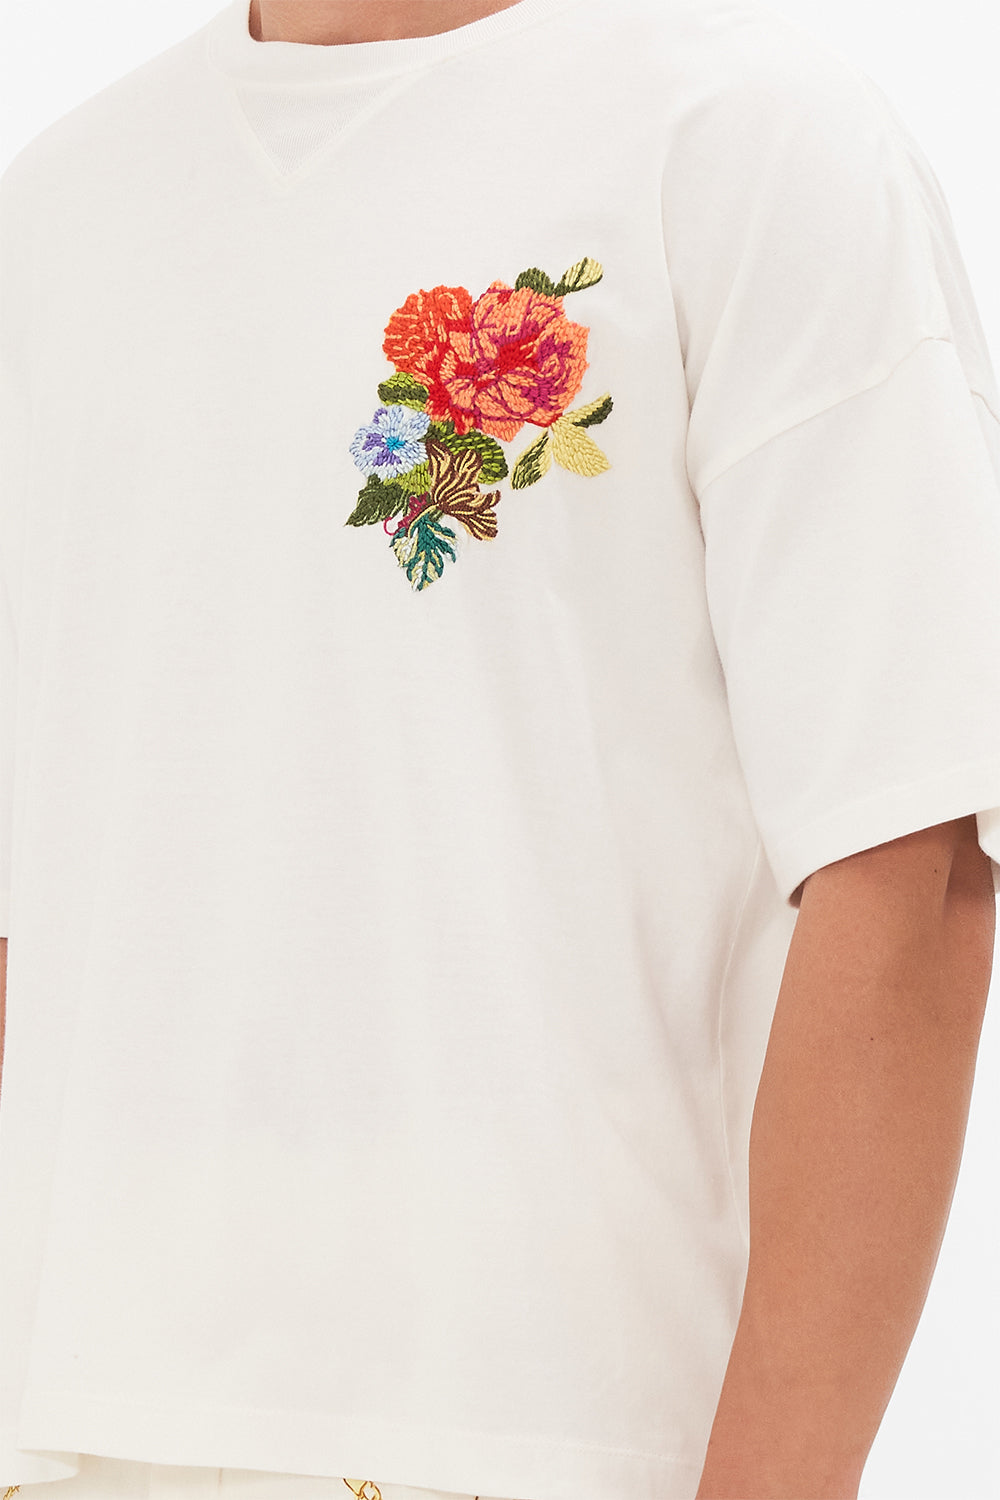 CAMILLA floral oversized boxy tee in Sew Yesterday